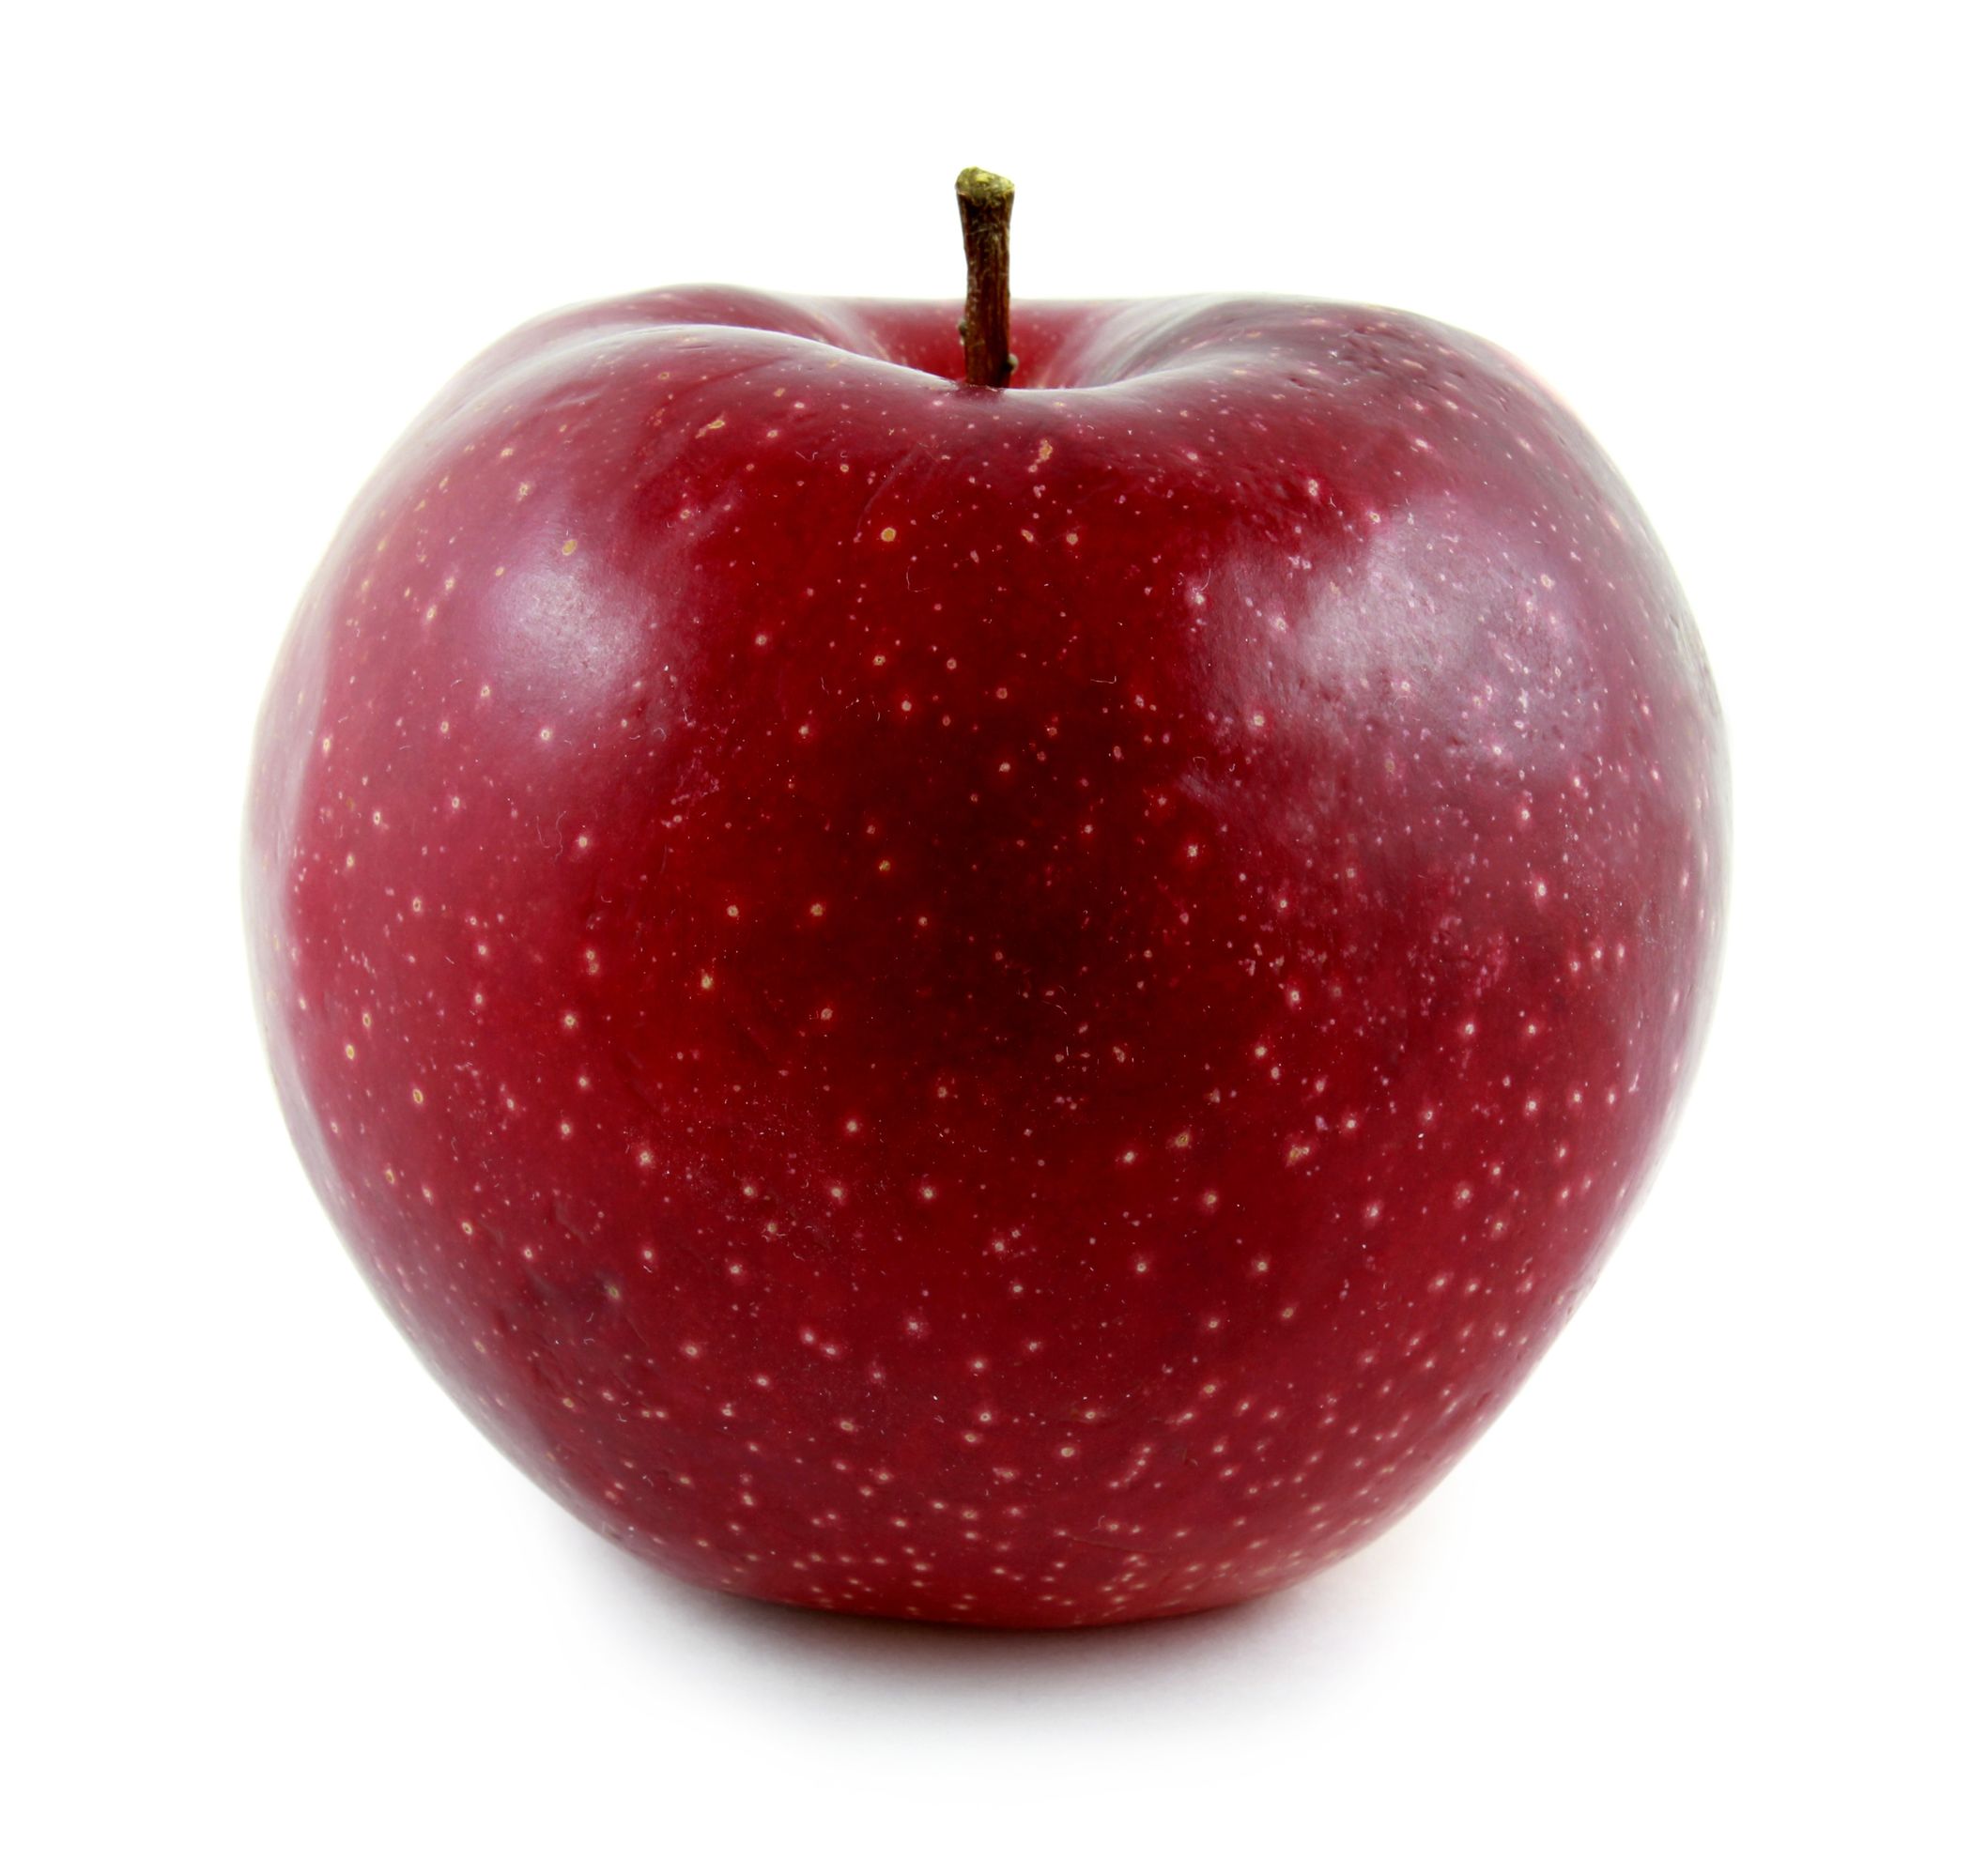 19286473 - red apple